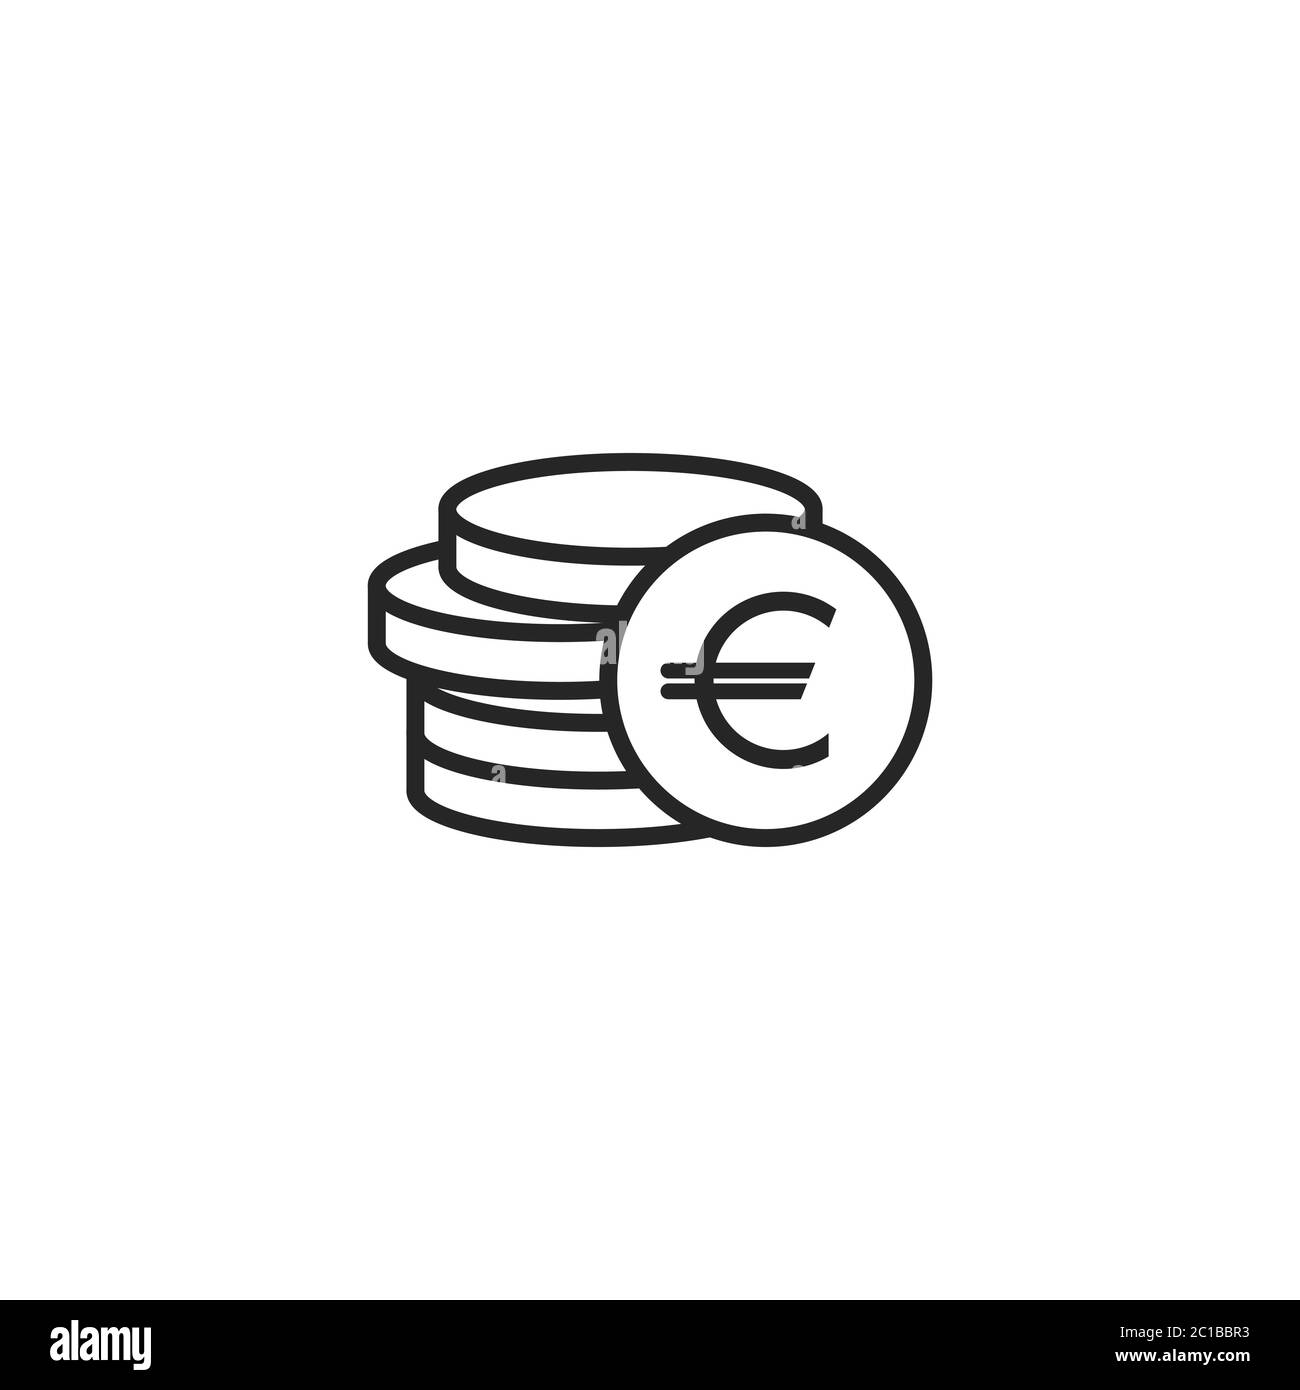 Stack of euro coins with coin in front of it. Flat black icon. Isolated on white. Economy, finance, money pictogram. Wealth symbol. Vector illustratio Stock Vector